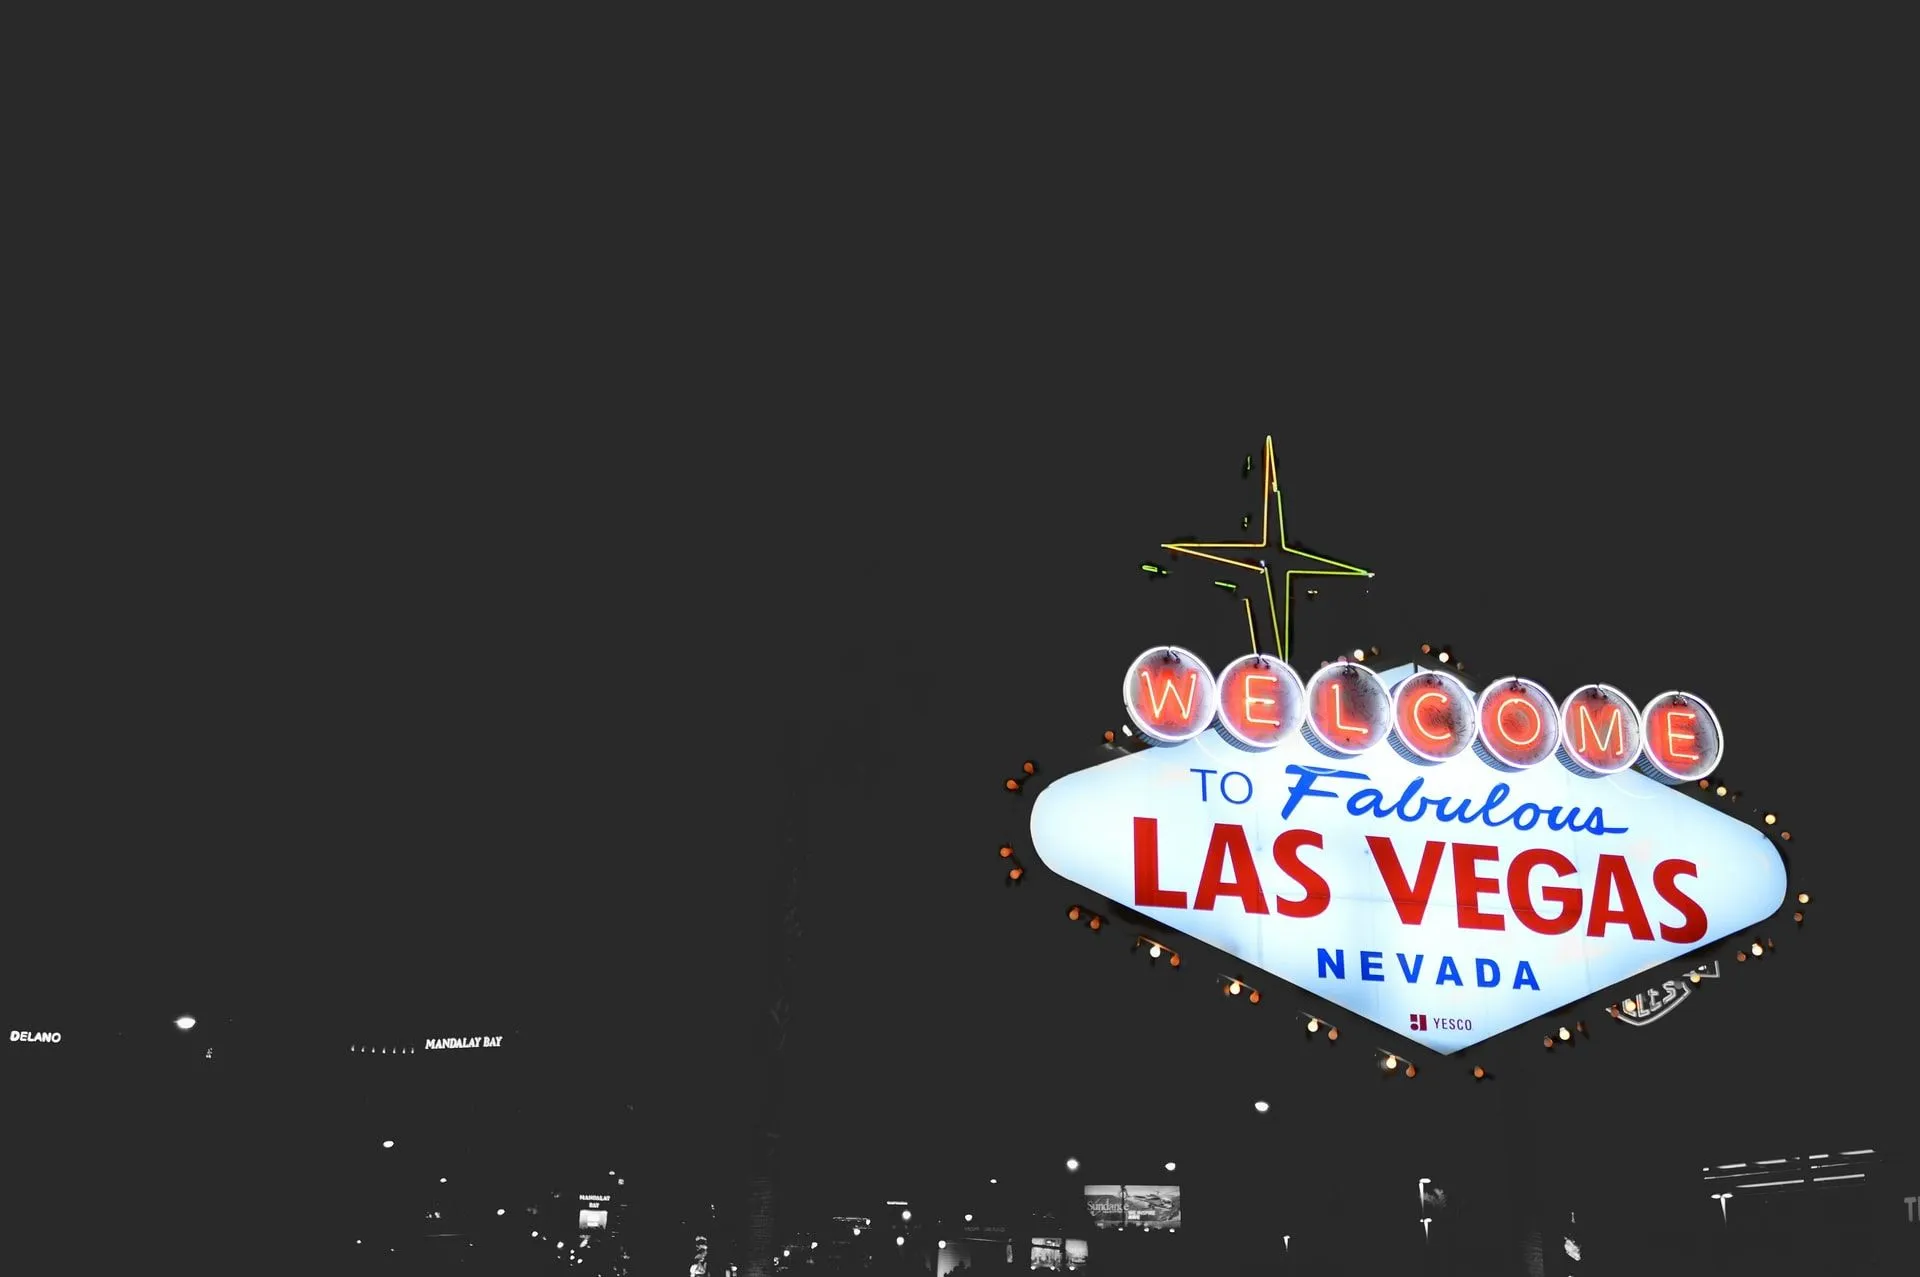 Las Vegas is known as the "City of Lights."